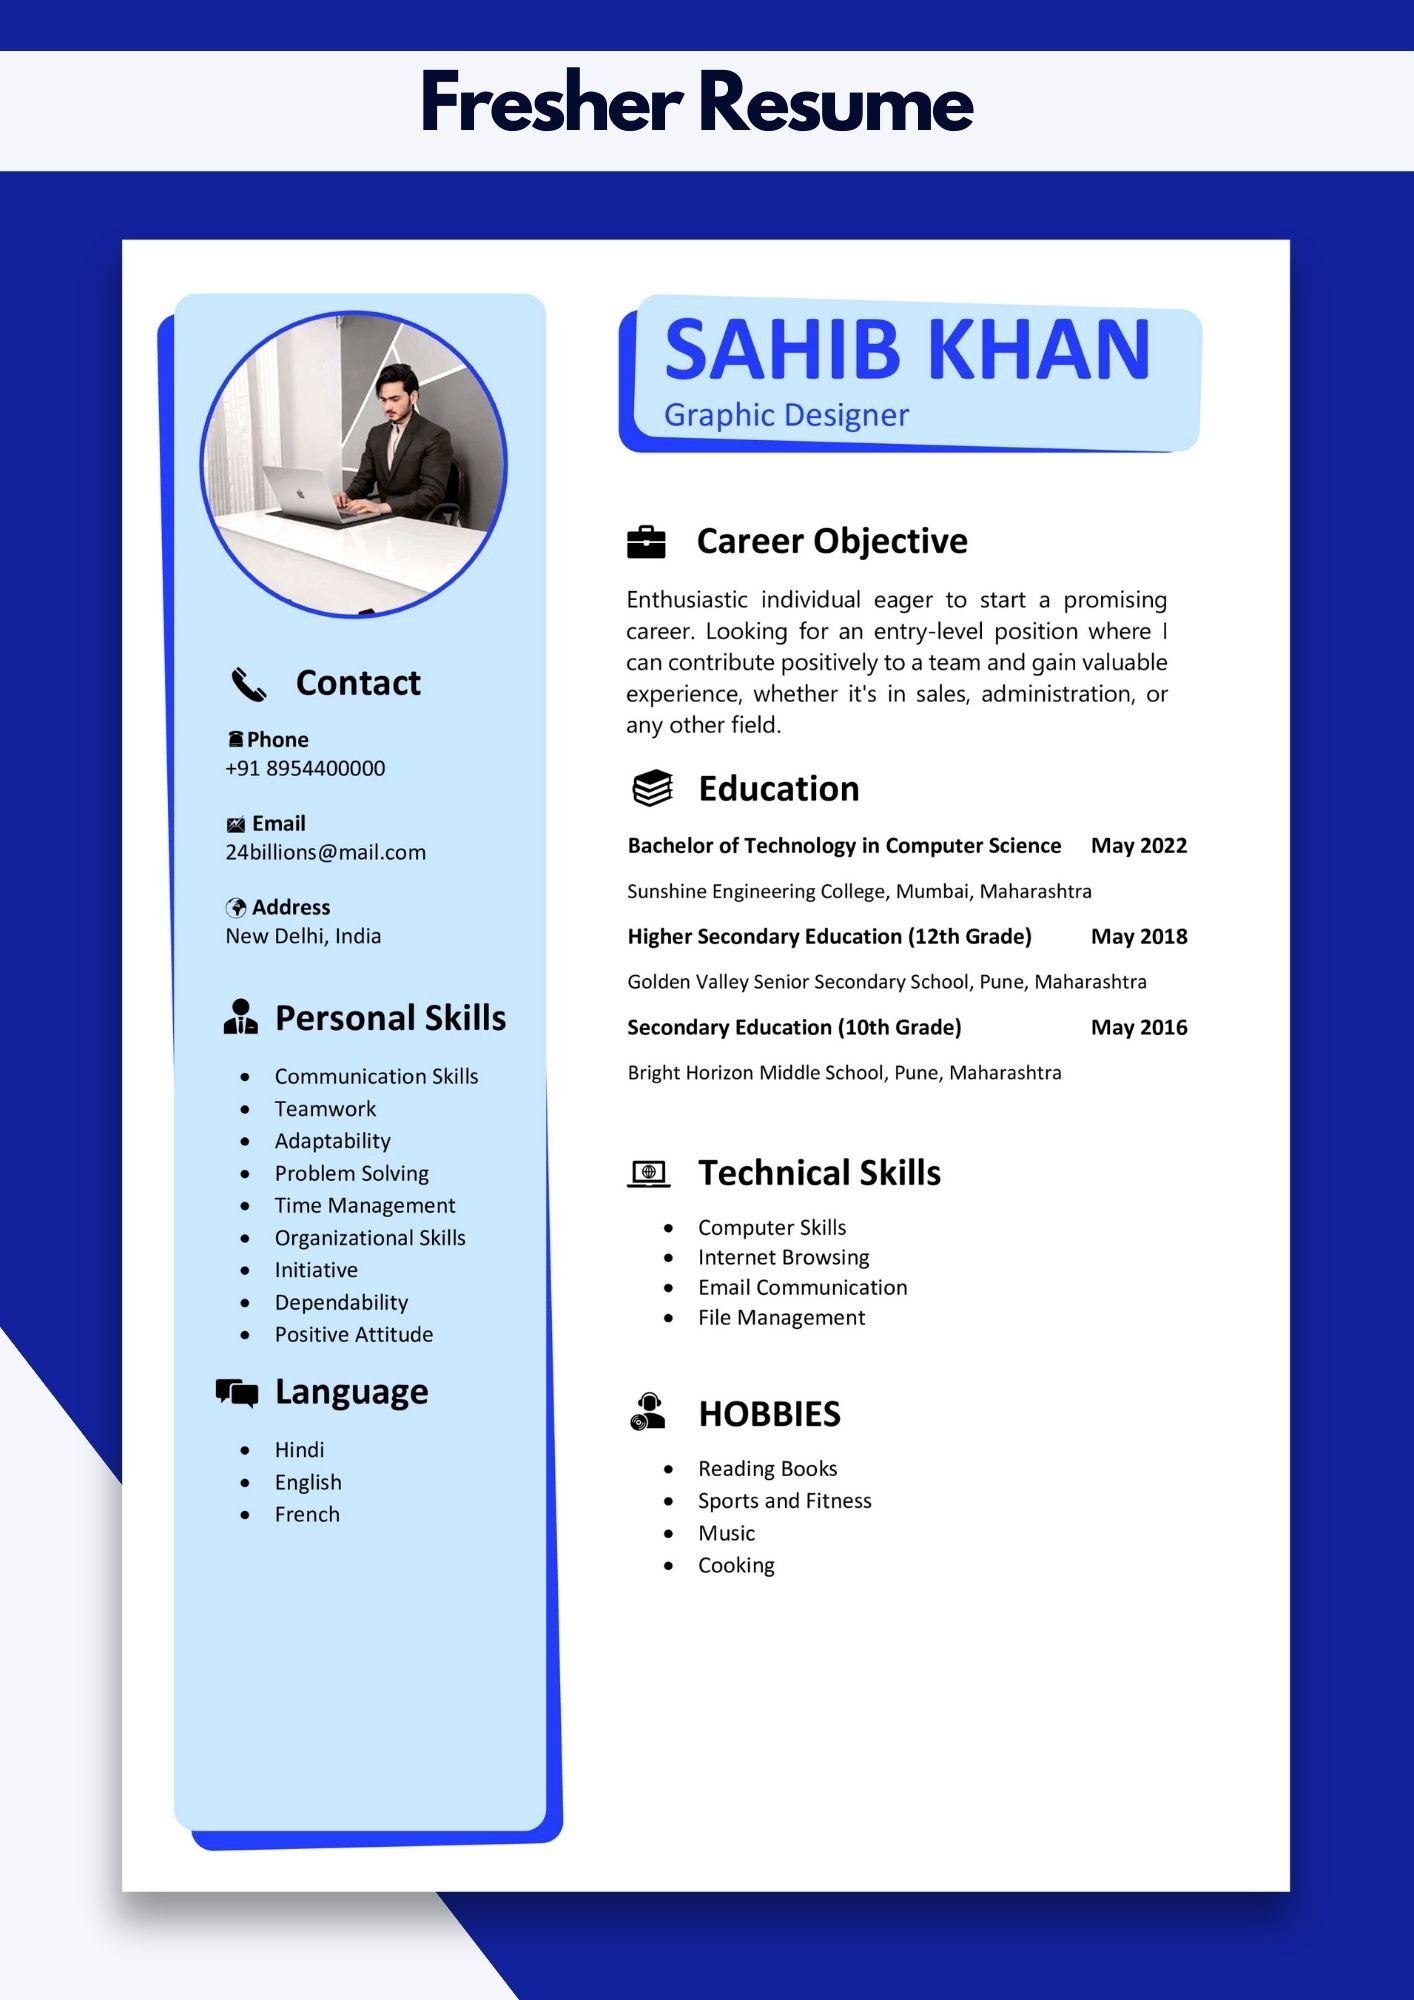 Templates Fresher Resume Free Download